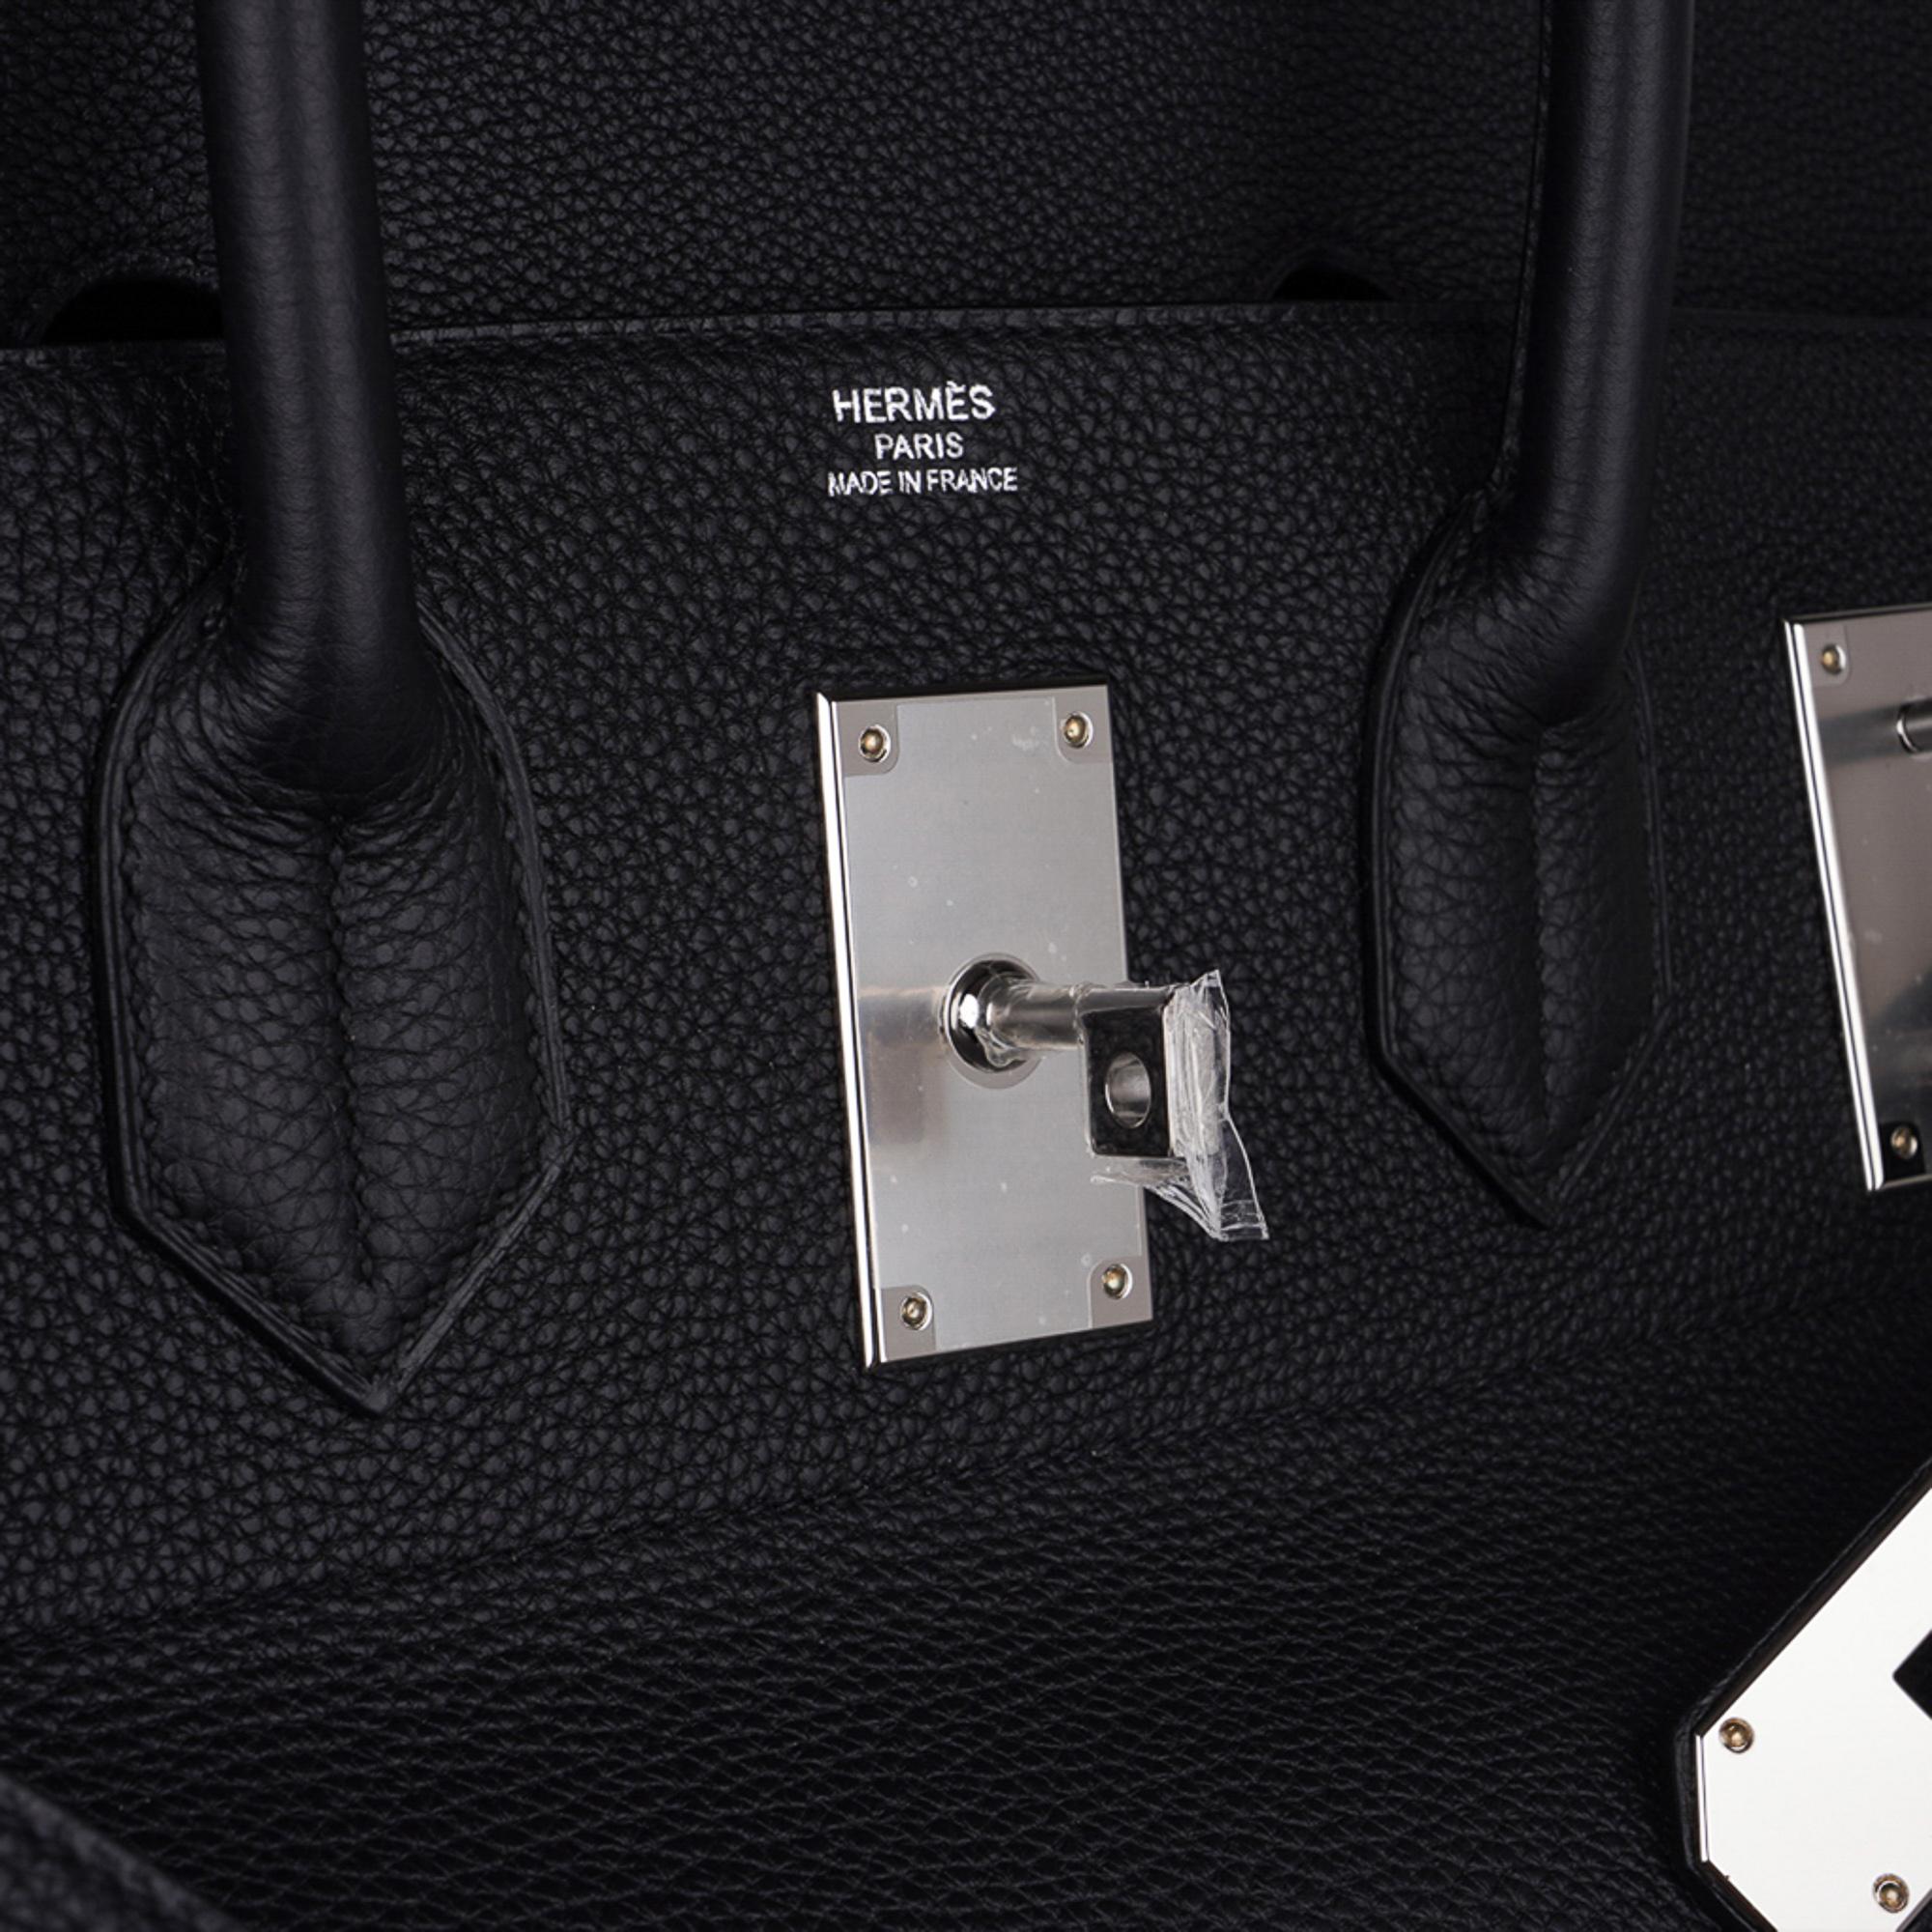 Mightychic offers an Hermes 50 Sac HAC (Haut a Courroies) Birkin bag featured in  Black..  
Togo leather is scratch resistant and is accentuated with Palladium hardware.
Chic and timeless.   
This beautiful travel bag is a true Hermes collectors